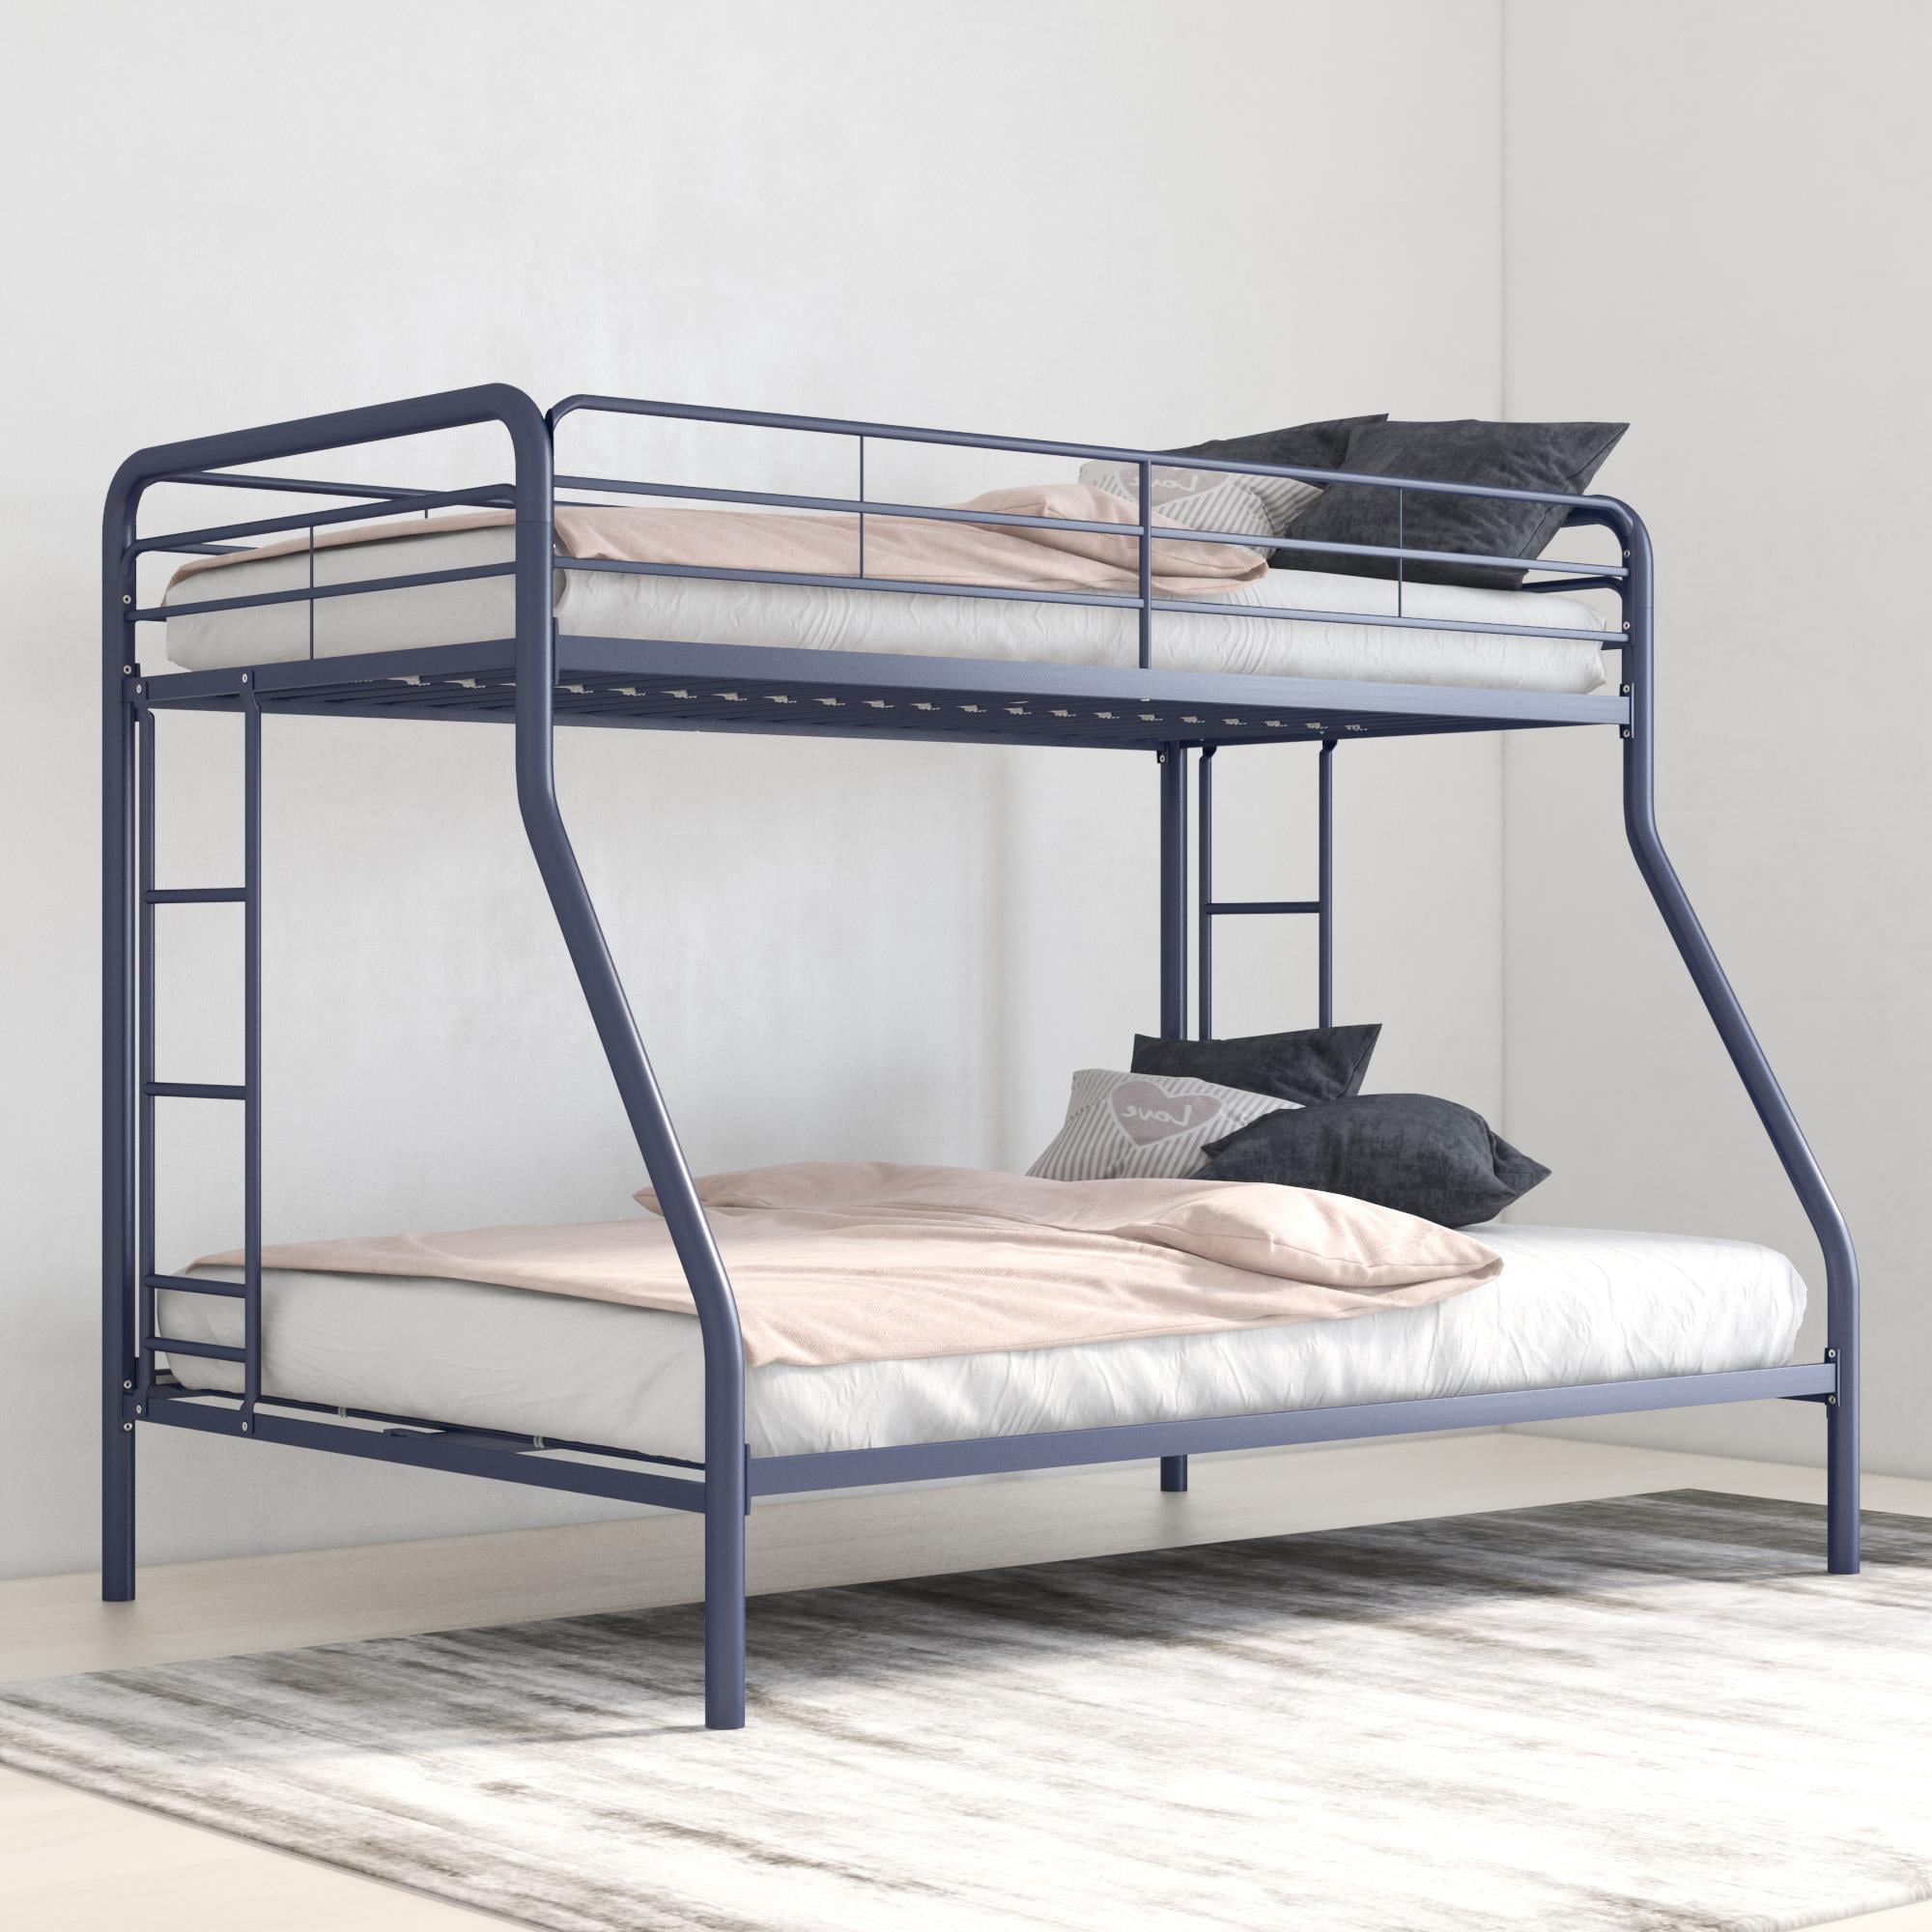 Dhp Twin Over Full Metal Bunk Bed Frame, Twin Over Full Futon Metal Bunk Bed